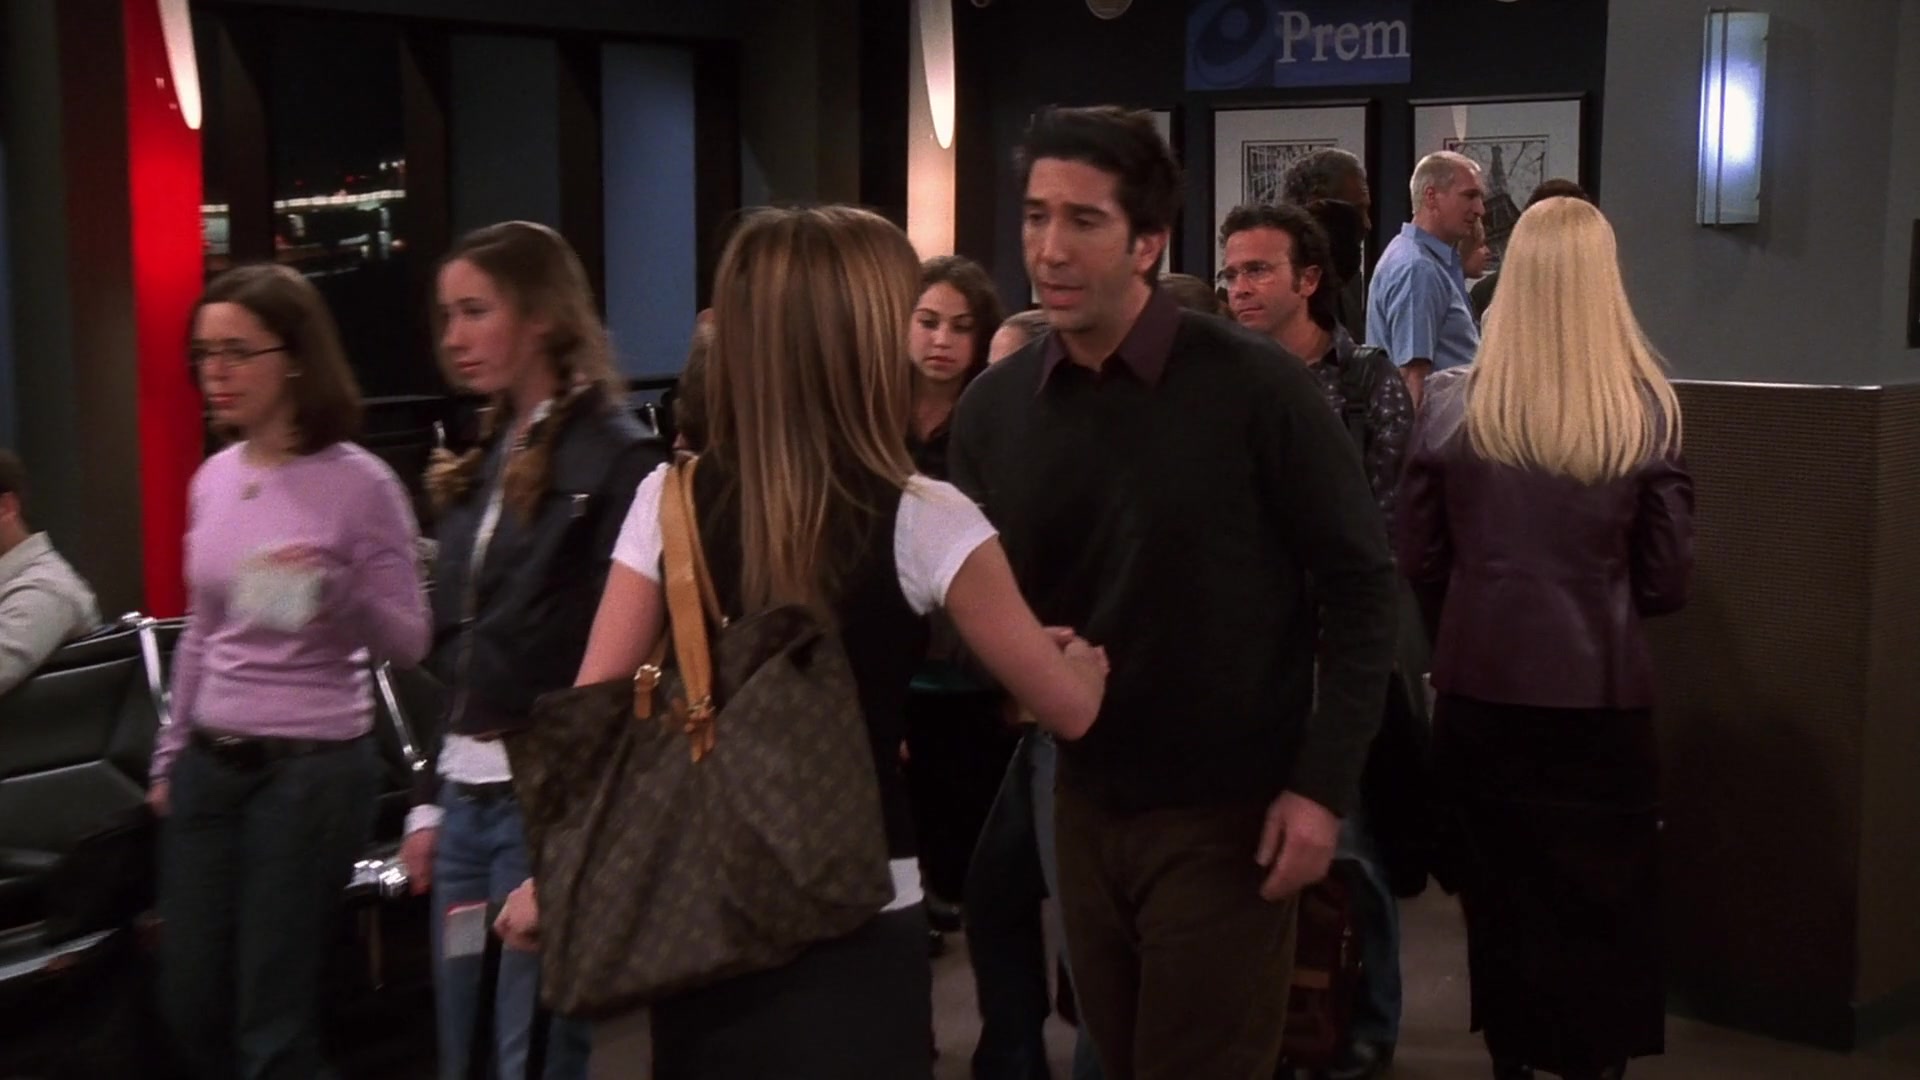 Louis Vuitton Bag Used By Jennifer Aniston (Rachel Green) In Friends Season  10 Episode 16 “The One With Rachel's Going Away Party” (2004)